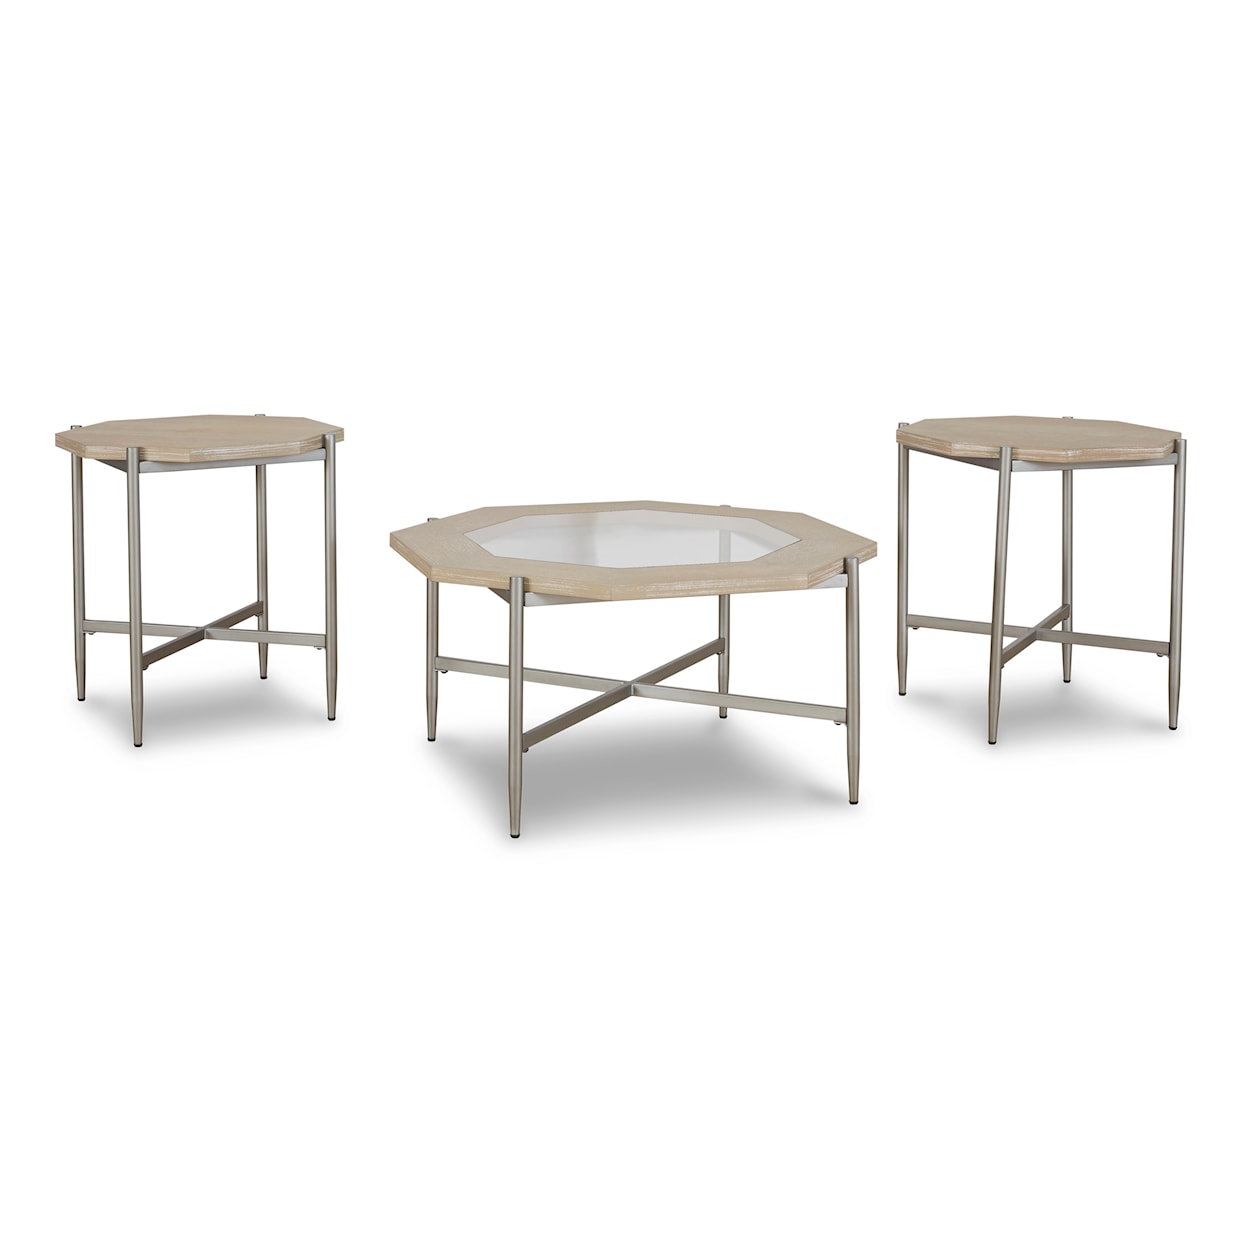 Signature Design by Ashley Furniture Varlowe 3-Piece Occasional Table Set